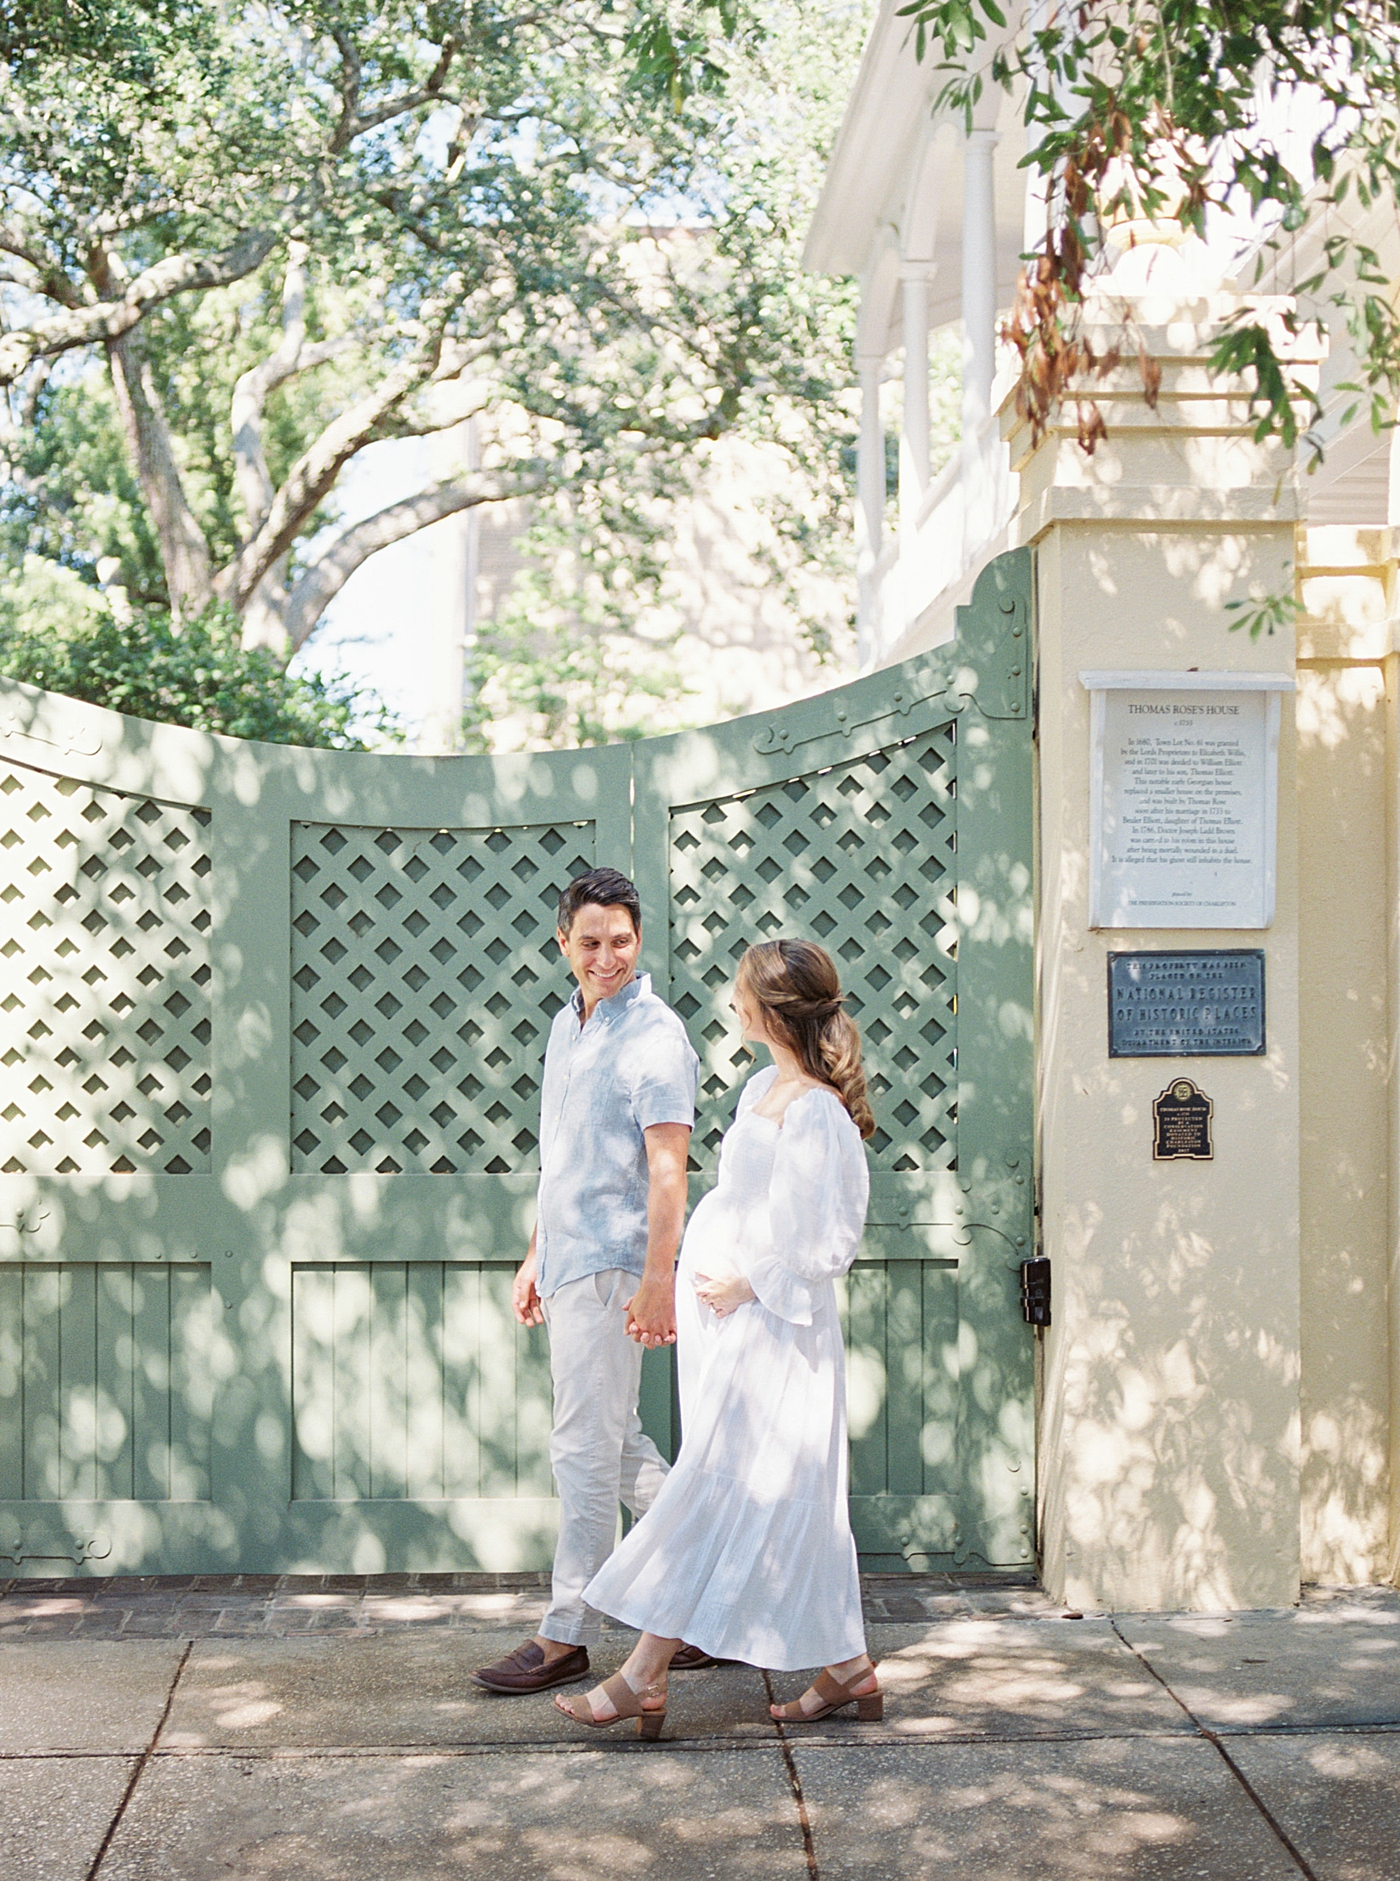 Mom and dad to be walking in front of a green gate | Photo by Caitlyn Motycka Photography